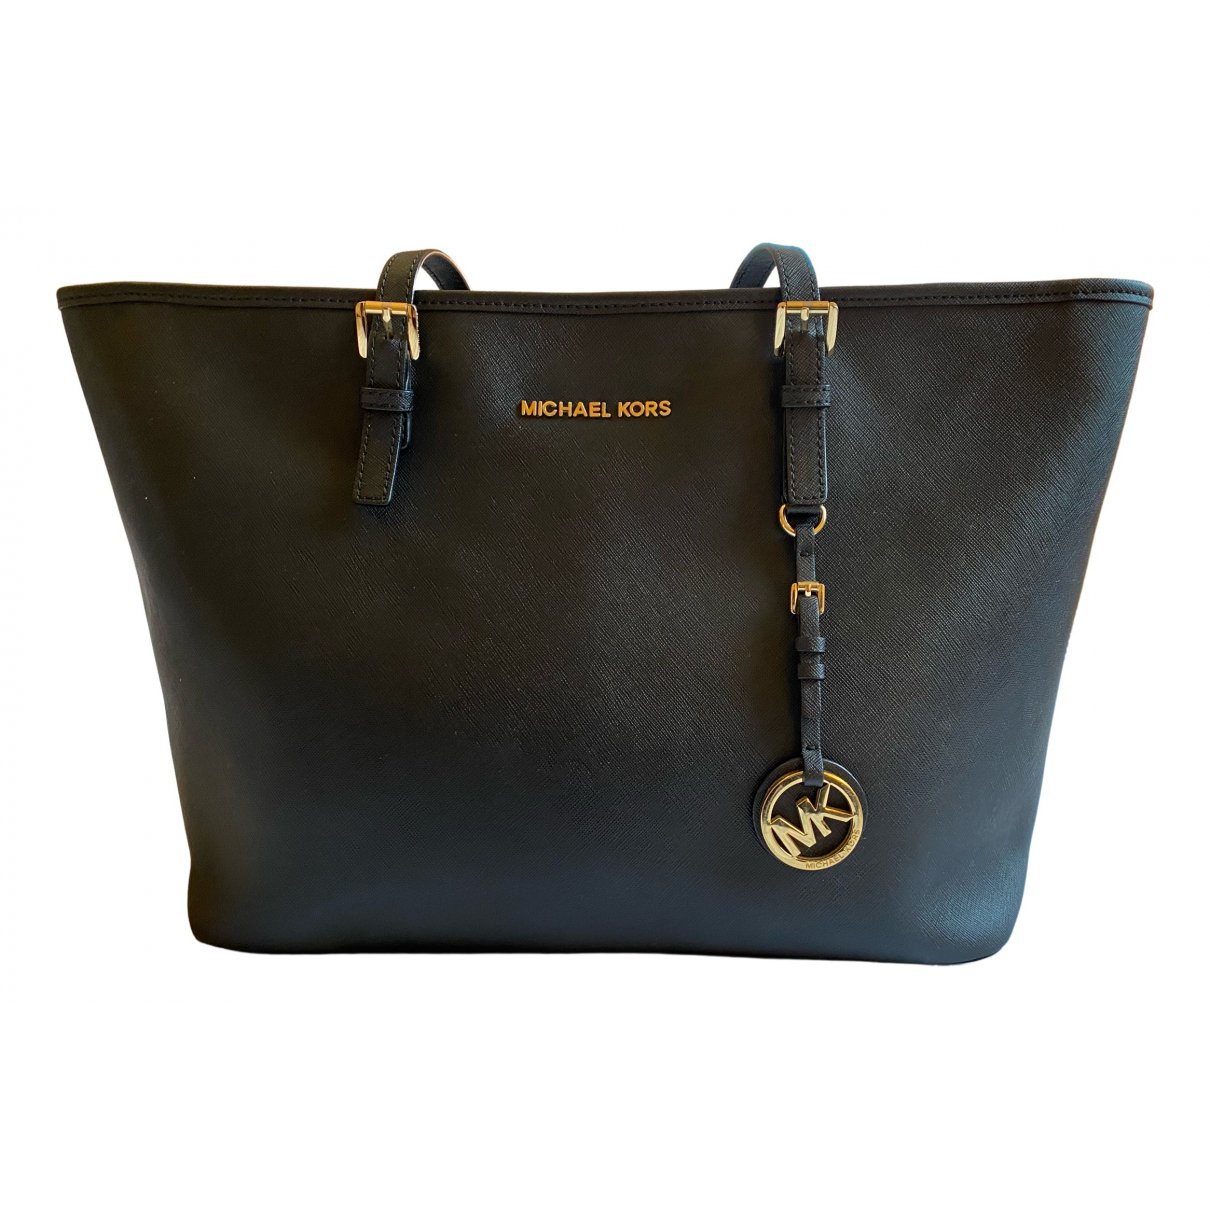 Michael Kors Jet Set Travel Tote in Black Leather — UFO No More